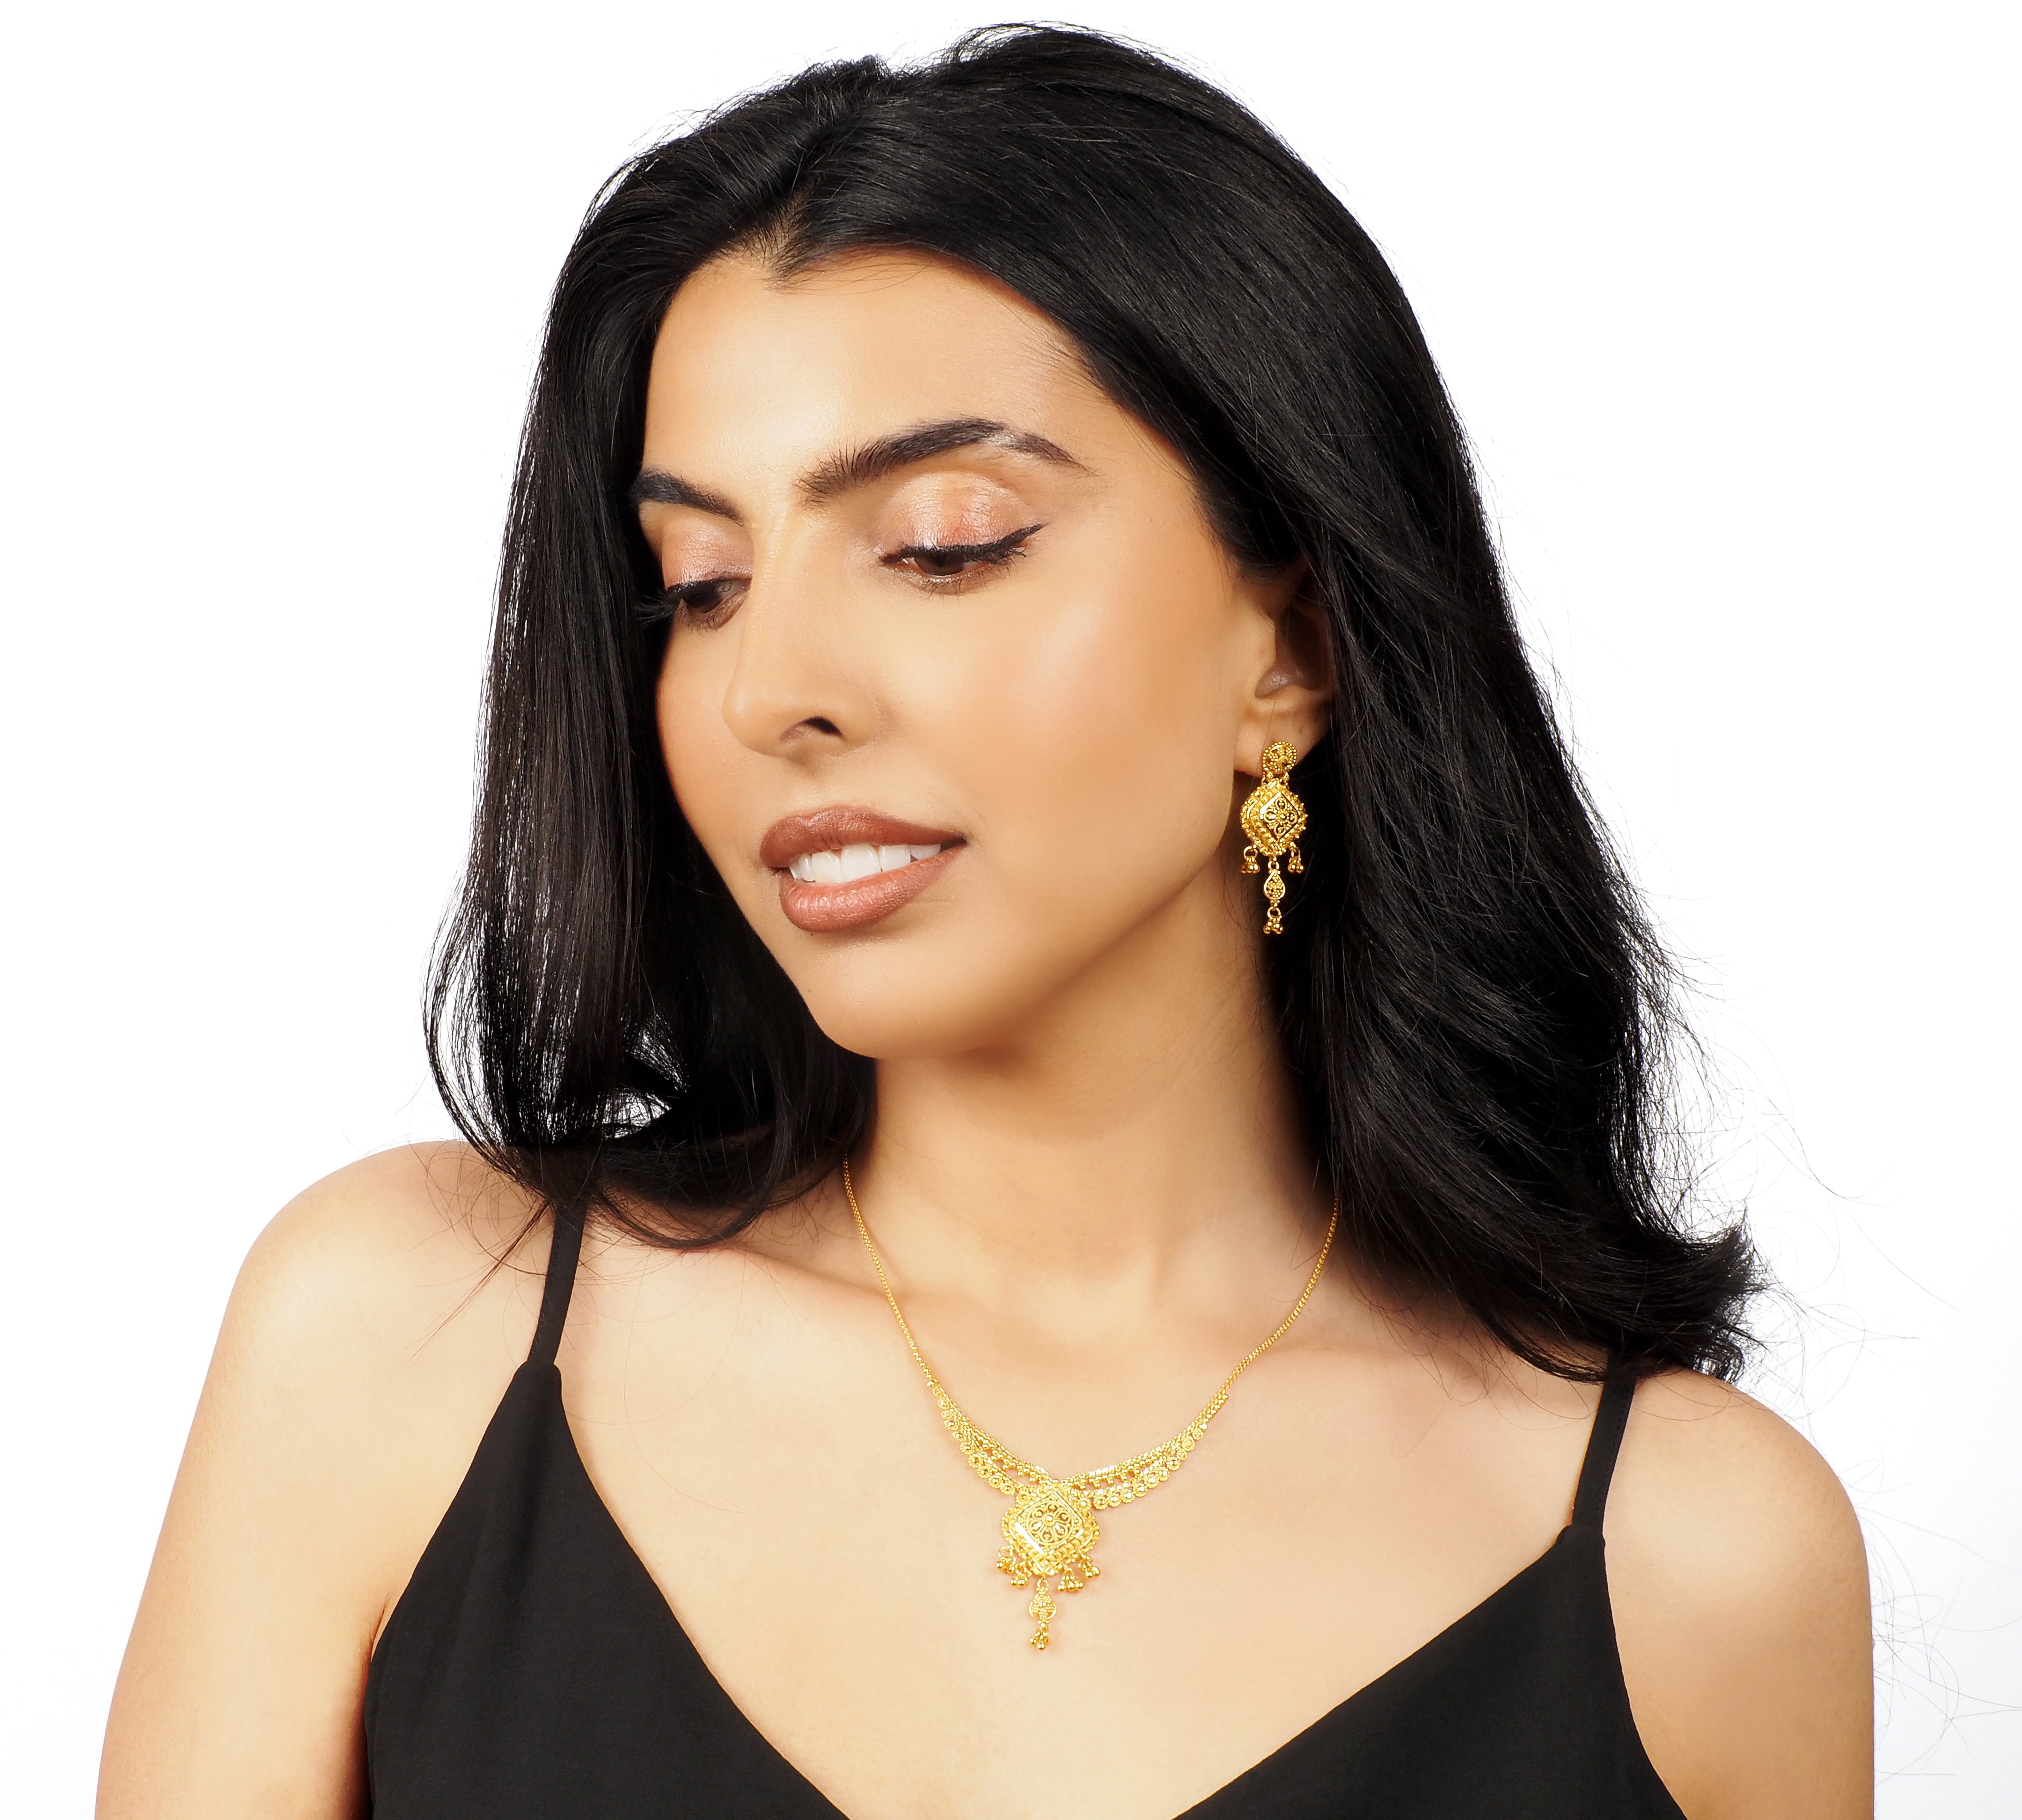 22ct Gold Filigree Necklace and Earrings Set N-8724 E-8724